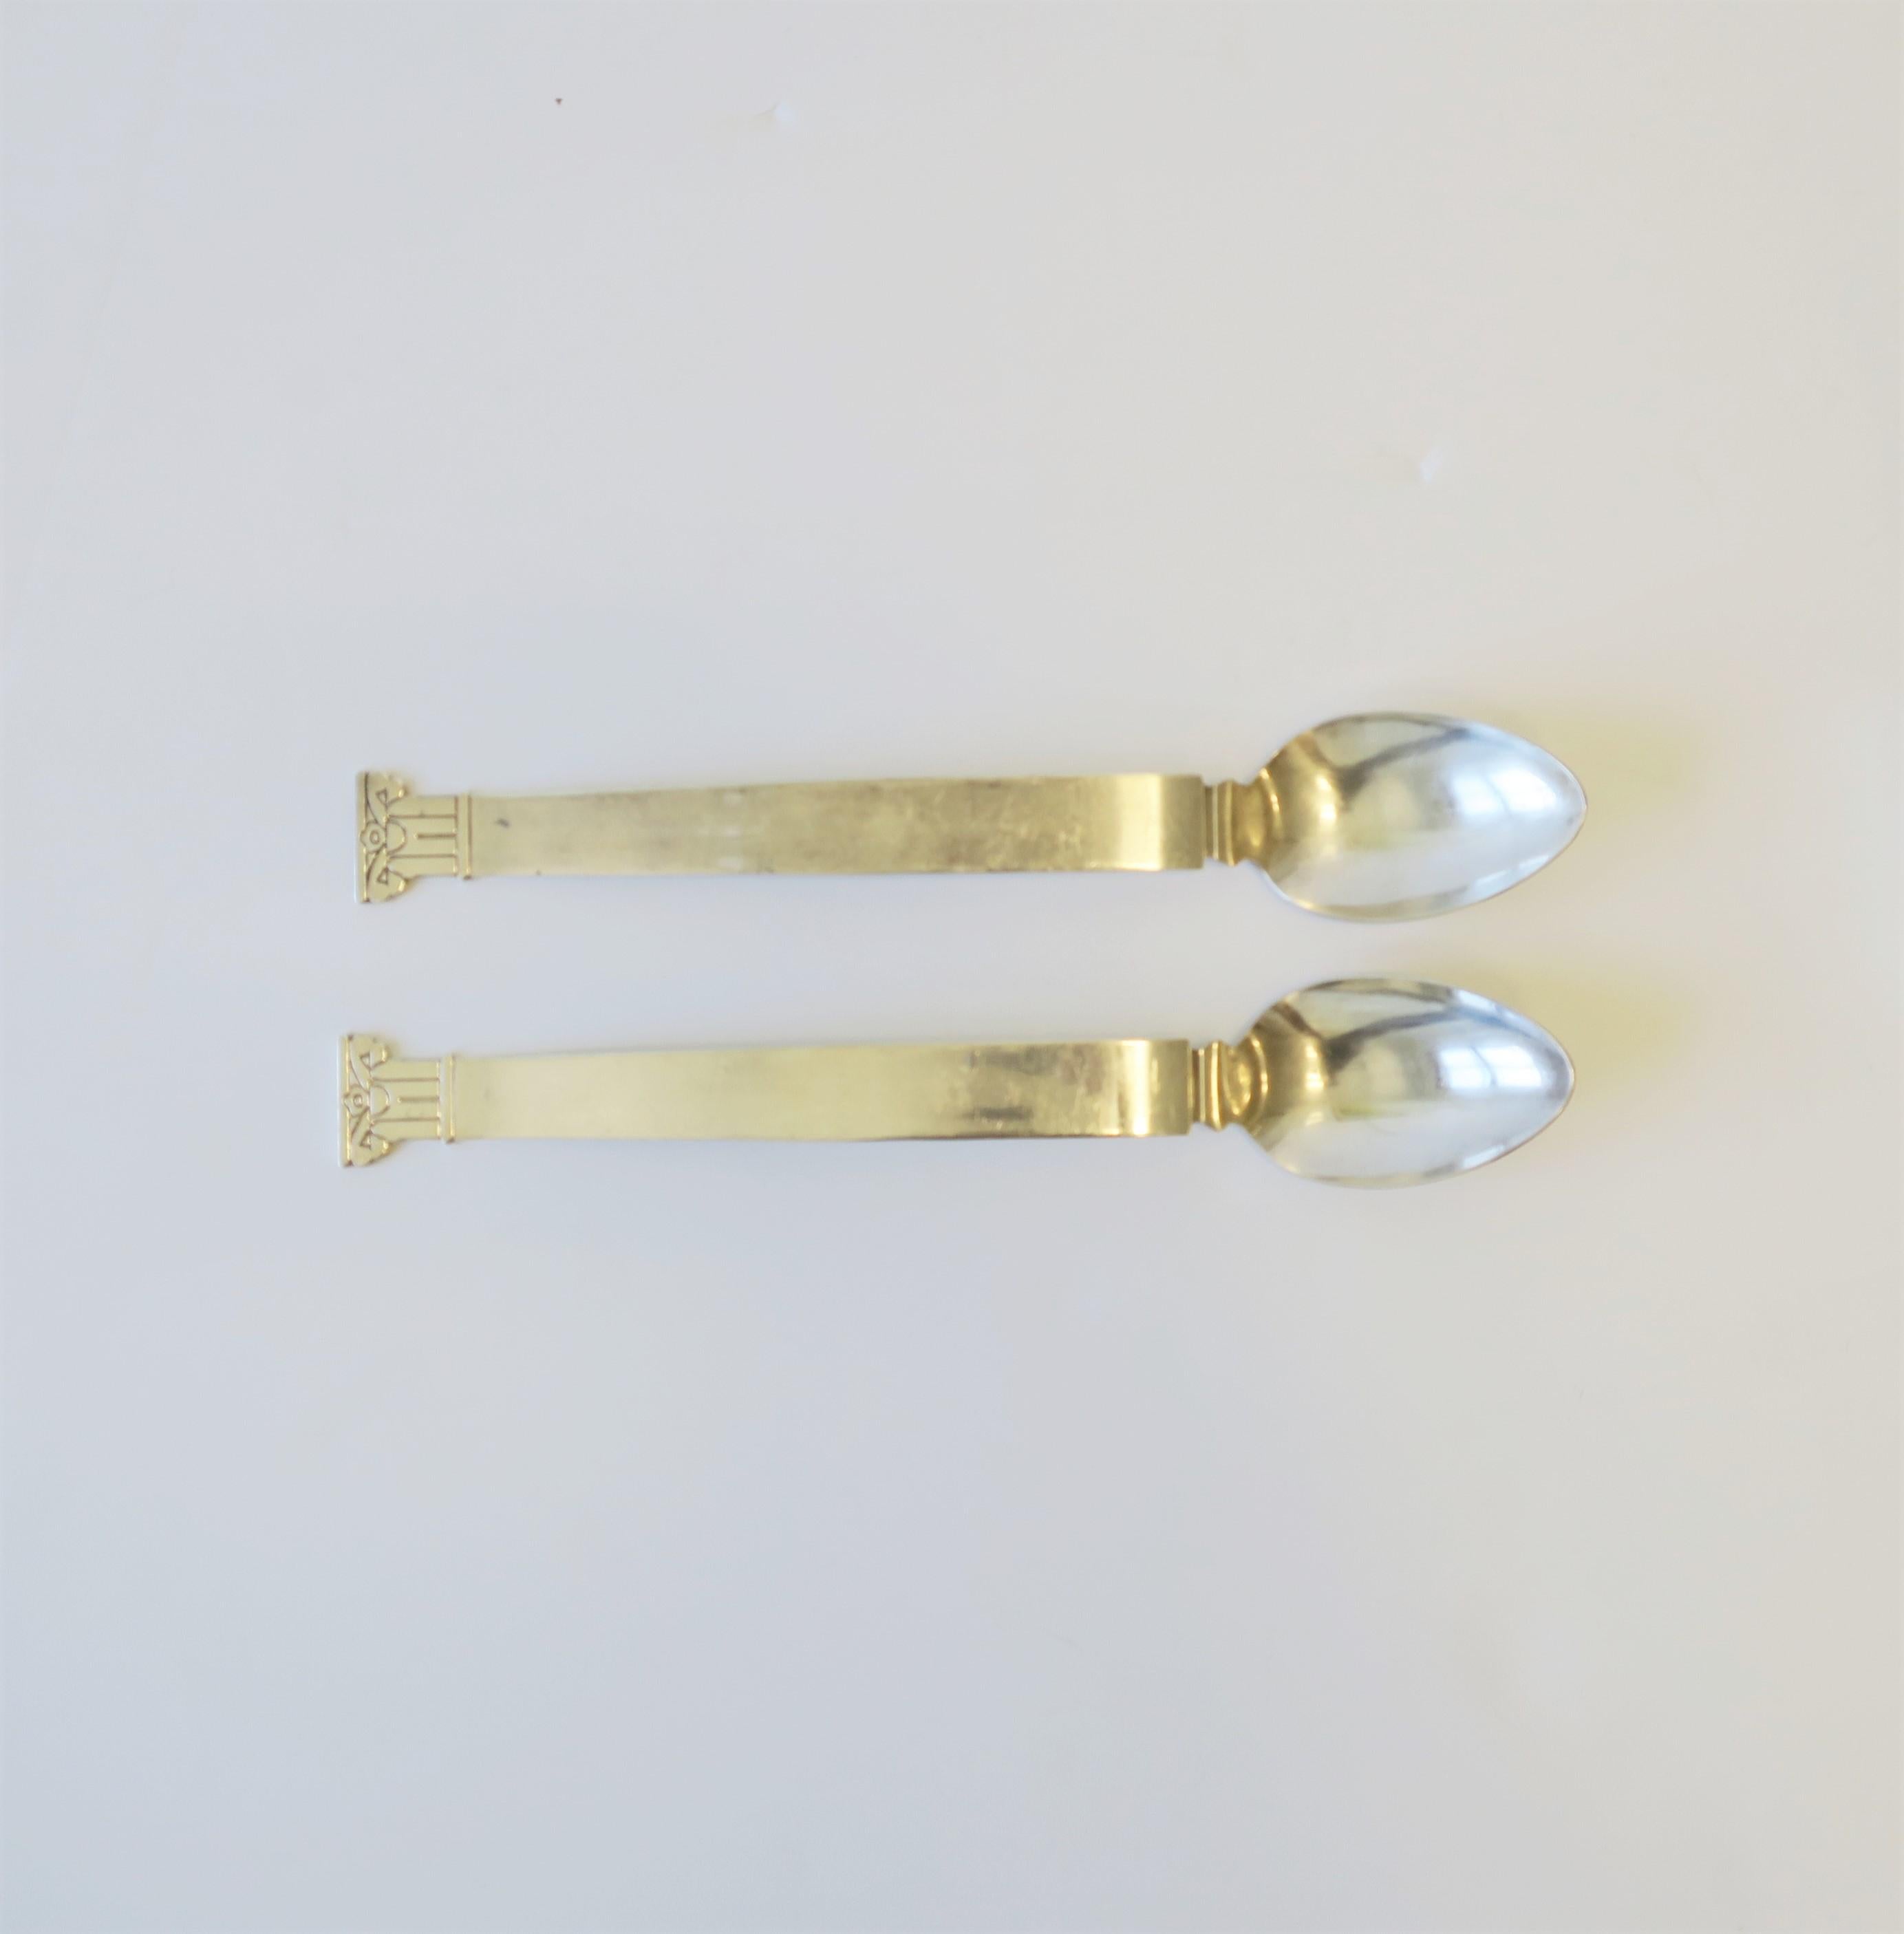 A beautiful, chic, substantial, and iconic set of designer Postmodern sterling silver-plate serving, salad or platter spoons with Neoclassical pillar column handle design, designed by architect Robert Venturi for Swid Powell, circa 1990s. Each